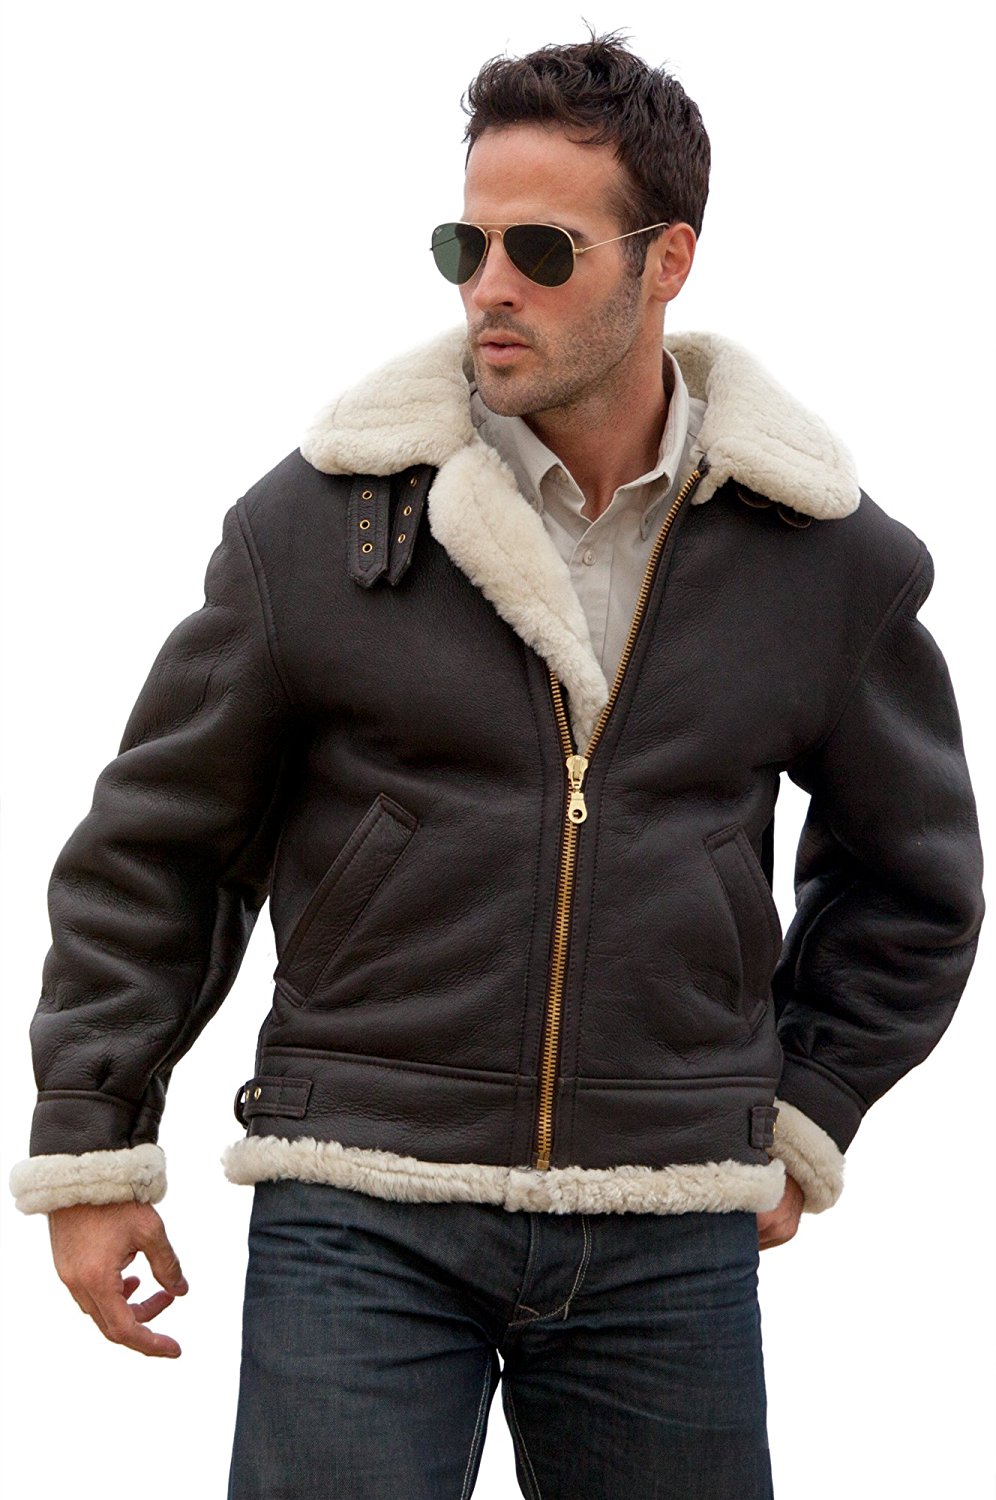 It should be comfortable in a sheepskin coat, especially when it is fully buttoned 